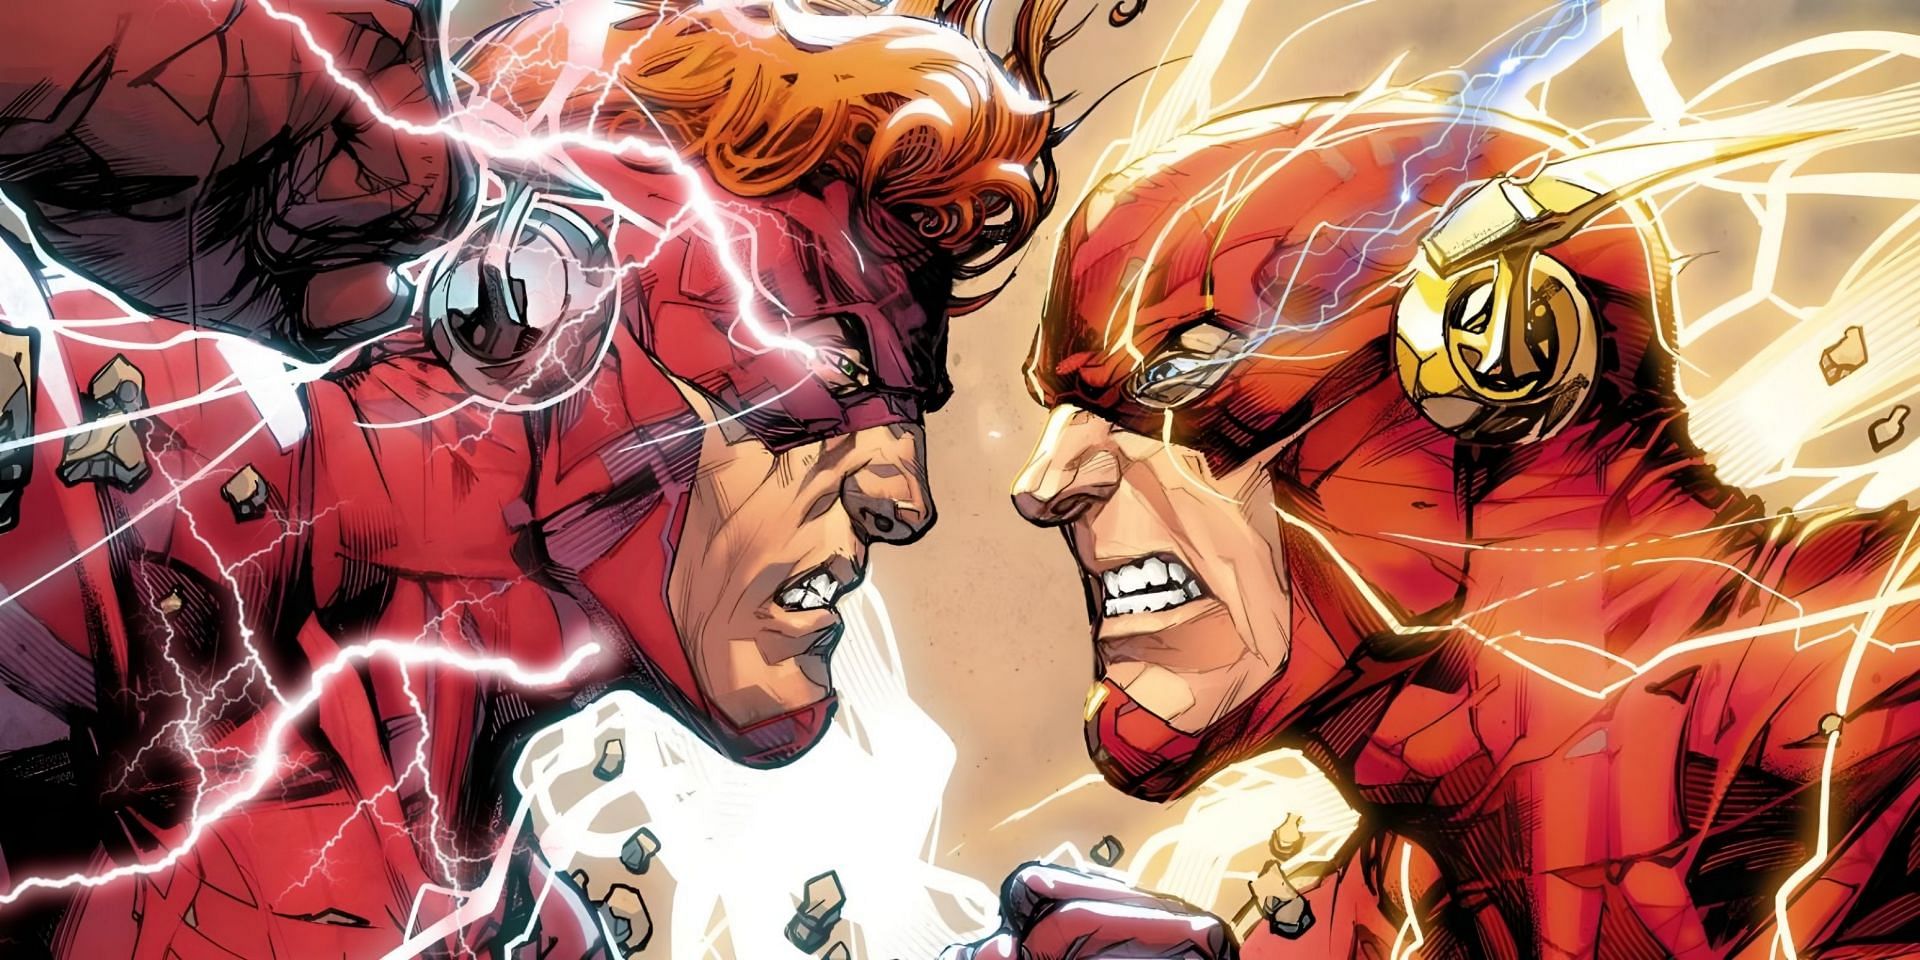 Is Wally West Faster Than Barry Allen's Flash in the DC Universe?